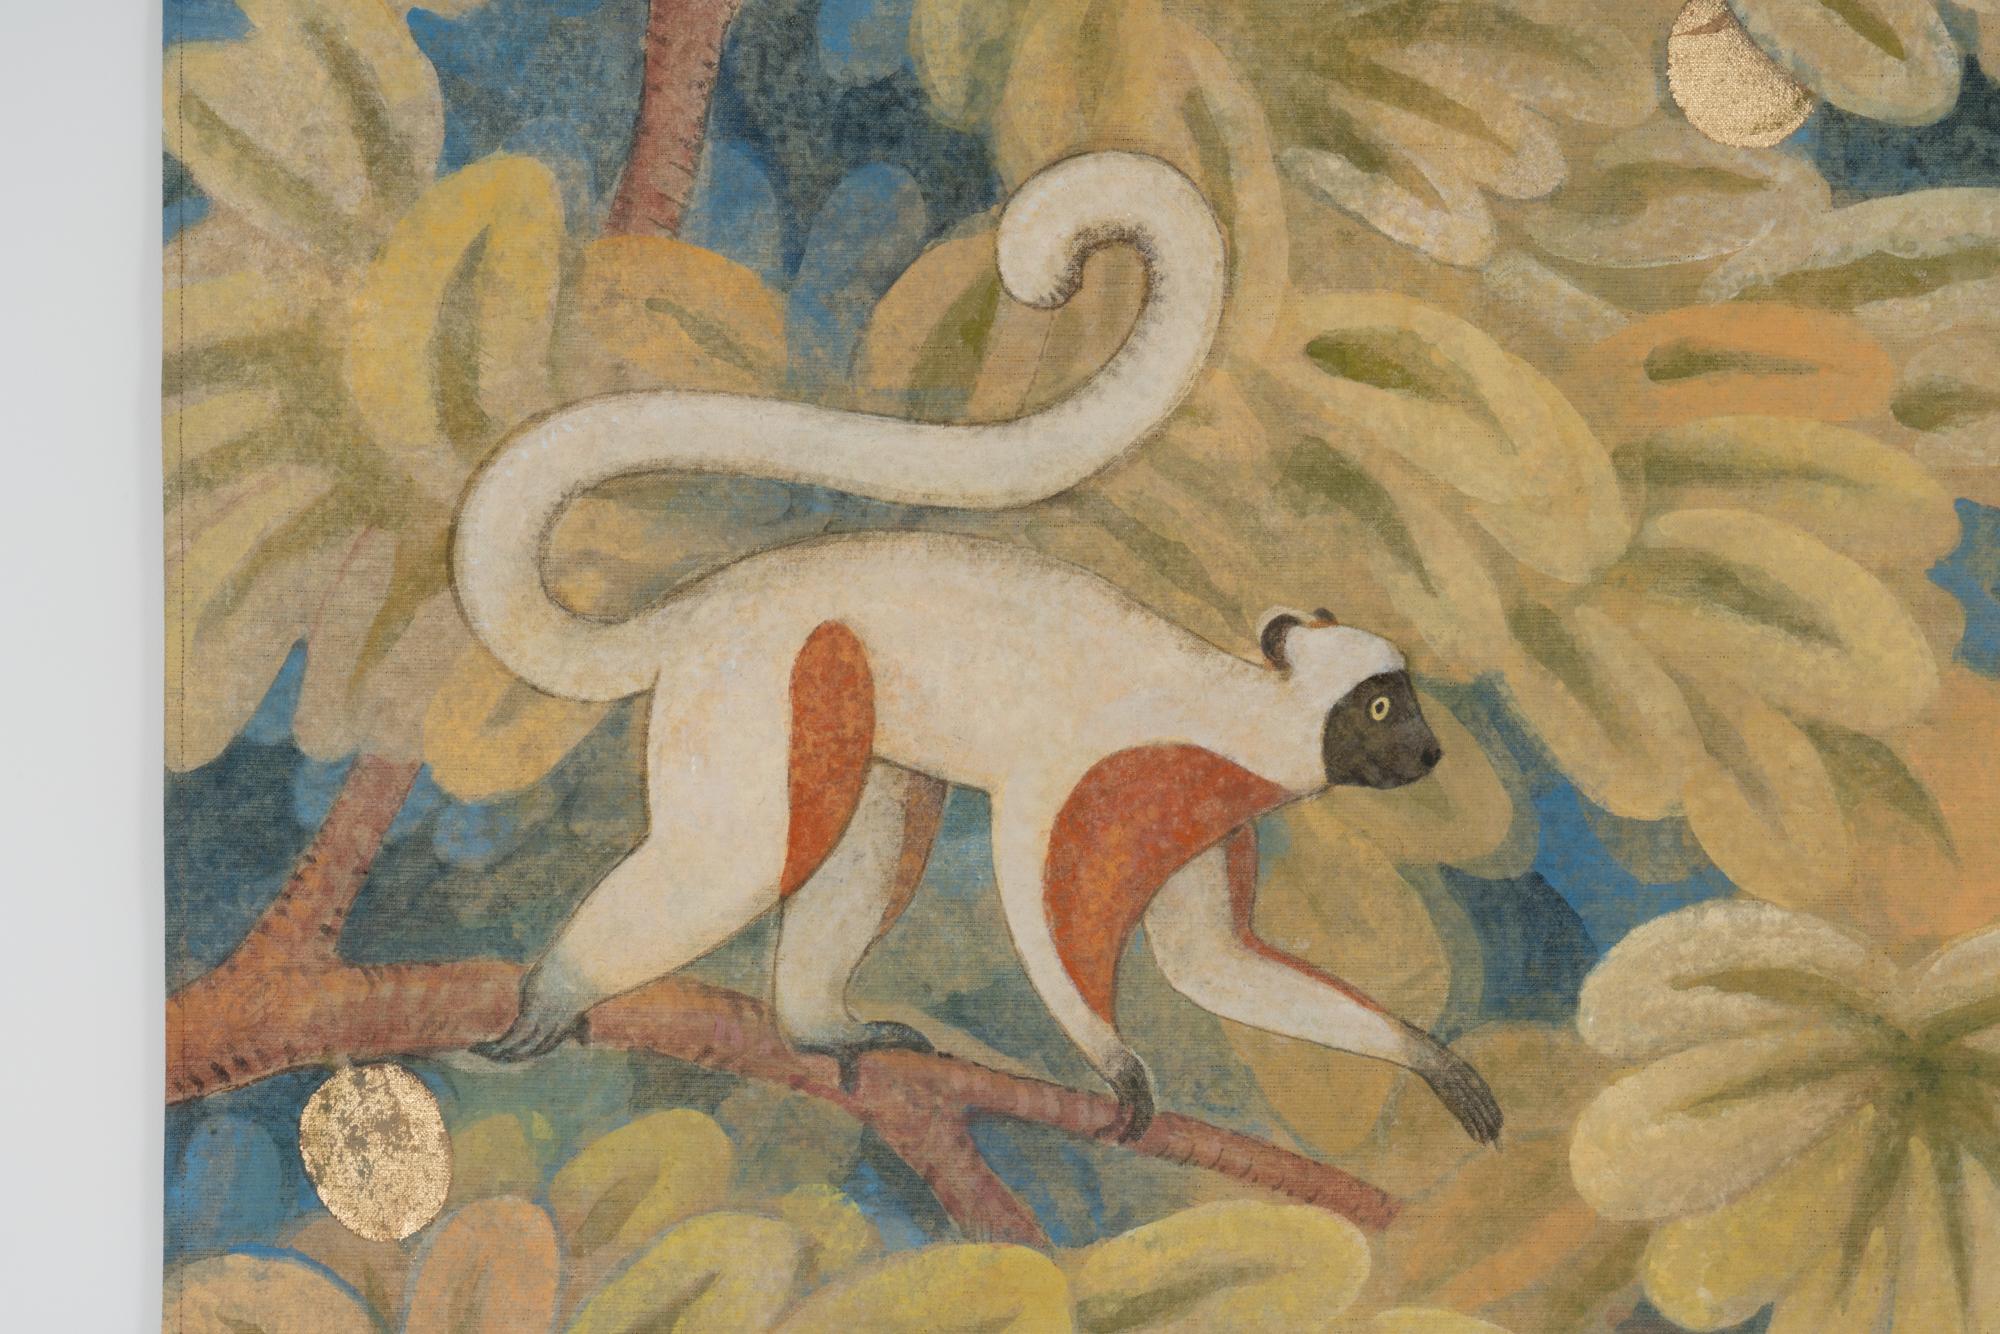 Painted linen canvas representing three Chimpanzees, on an Aubusson style background.

Contemporary French craftsmanship.